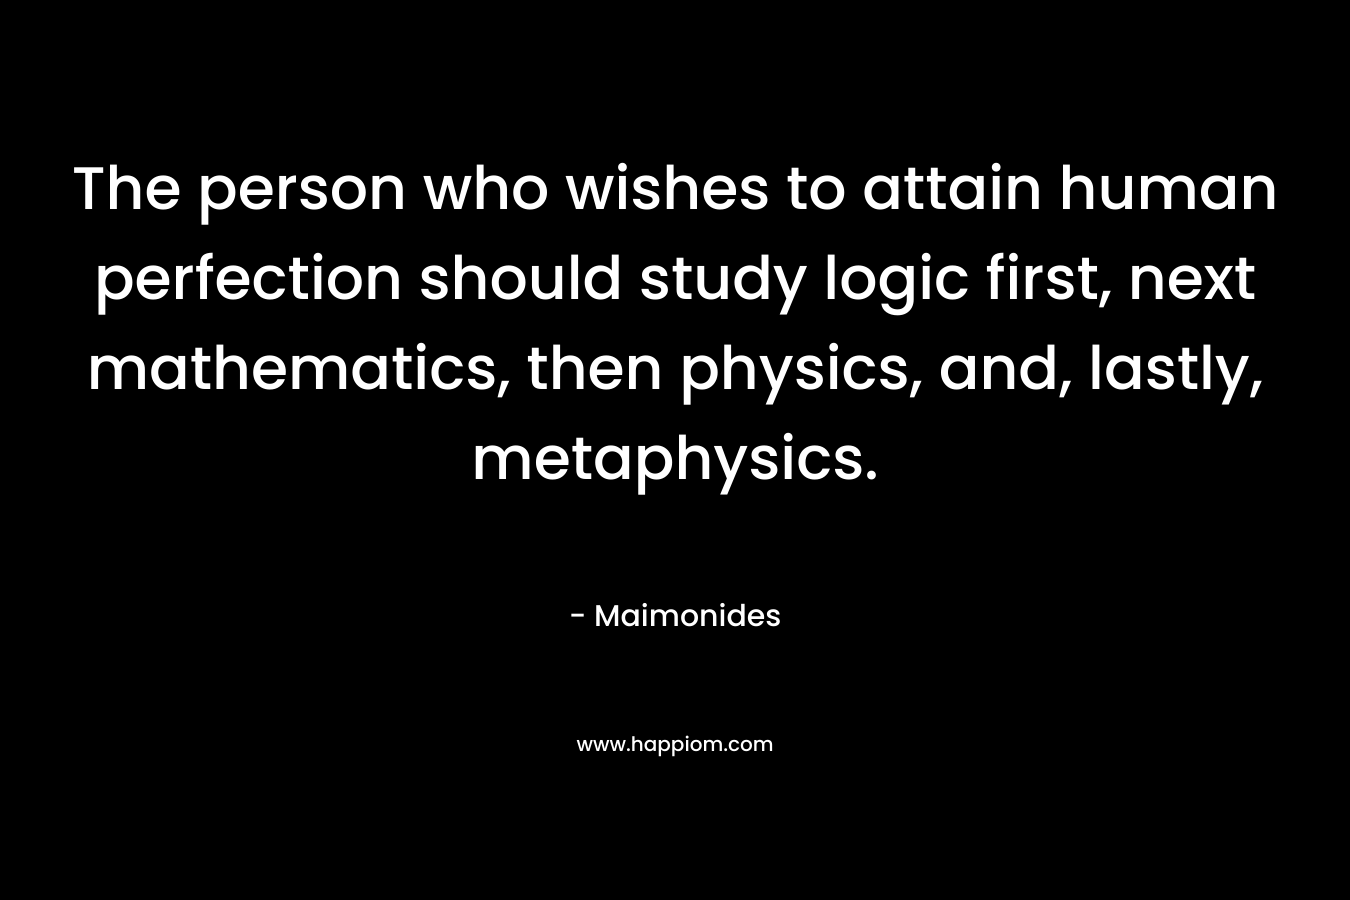 The person who wishes to attain human perfection should study logic first, next mathematics, then physics, and, lastly, metaphysics.